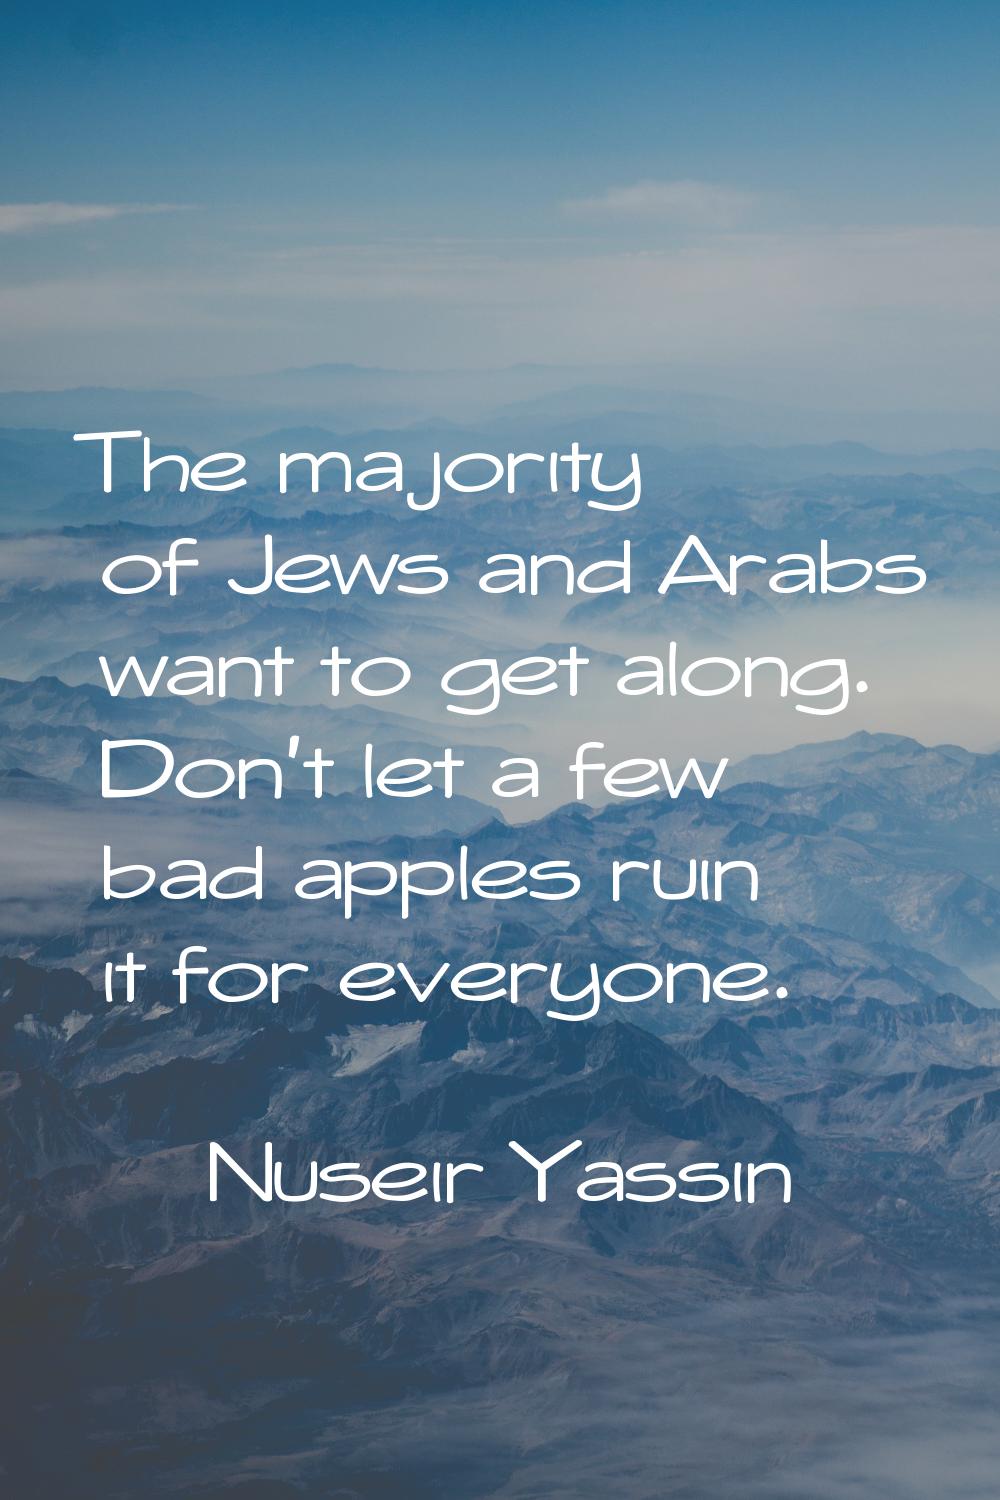 The majority of Jews and Arabs want to get along. Don't let a few bad apples ruin it for everyone.